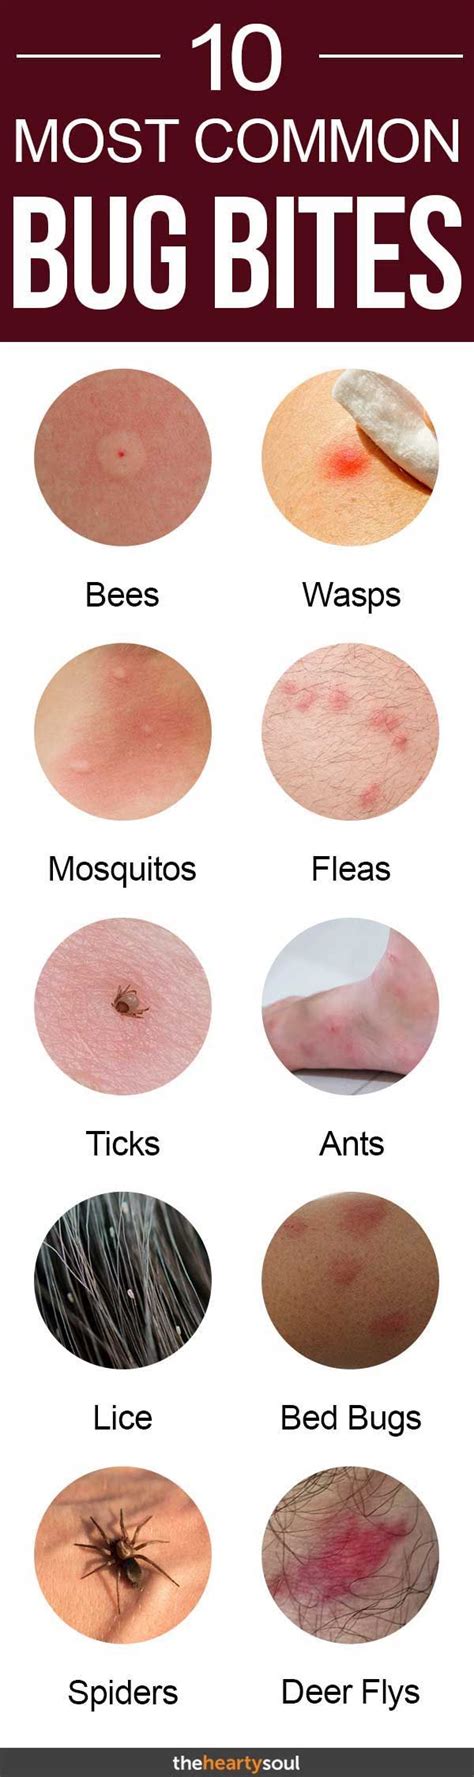 Bug Bites Can Be Itchy And Frustrating Some Can Even Be Dangerous